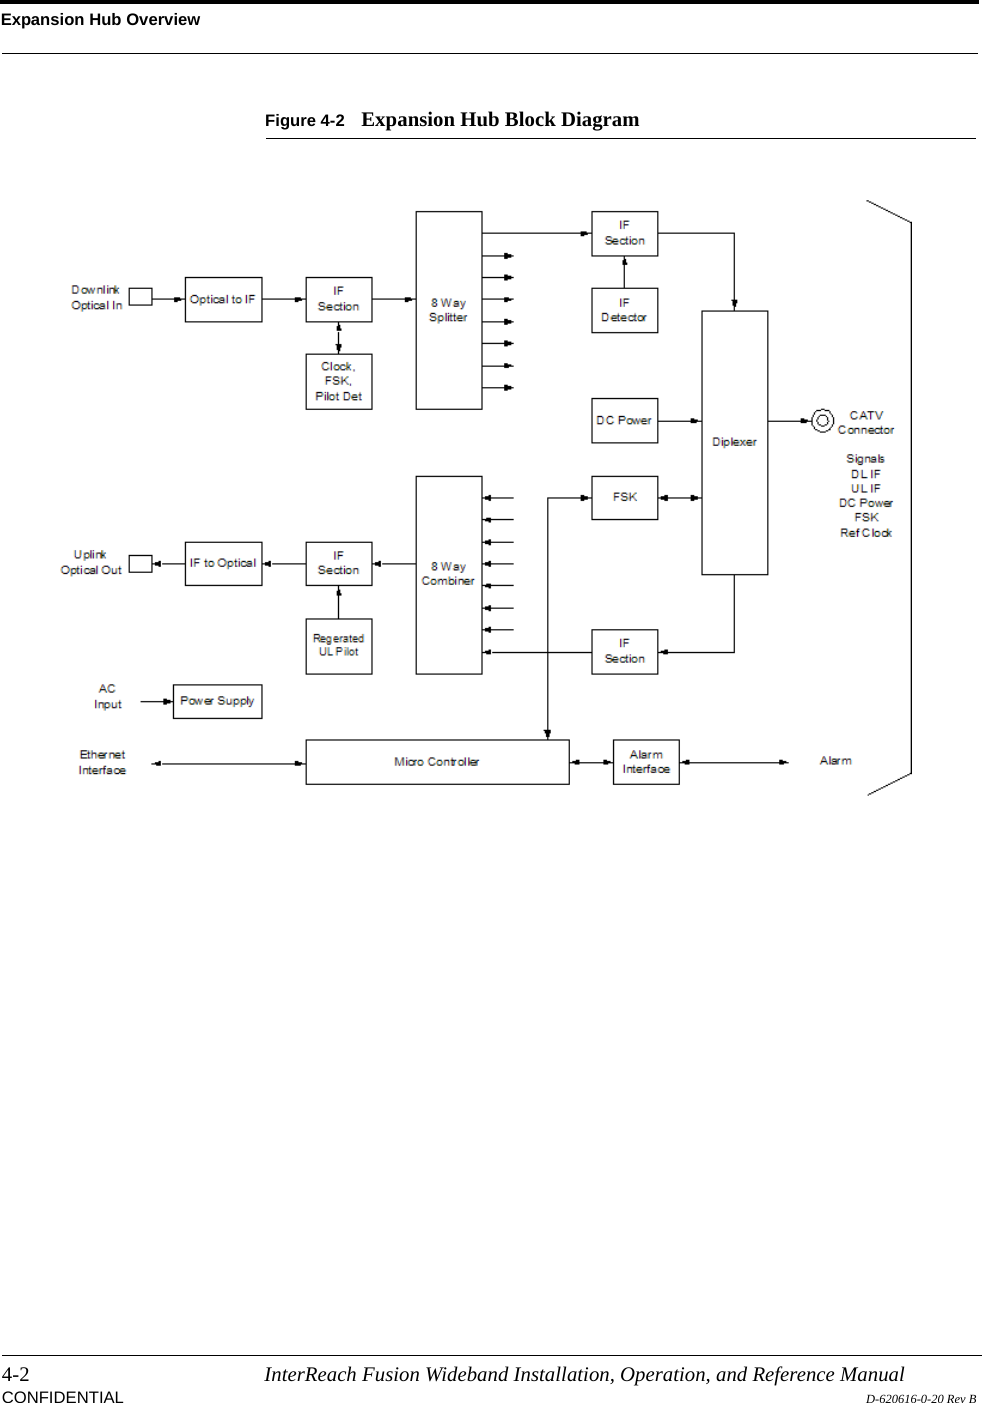 Expansion Hub Overview4-2 InterReach Fusion Wideband Installation, Operation, and Reference ManualCONFIDENTIAL D-620616-0-20 Rev BFigure 4-2 Expansion Hub Block Diagram